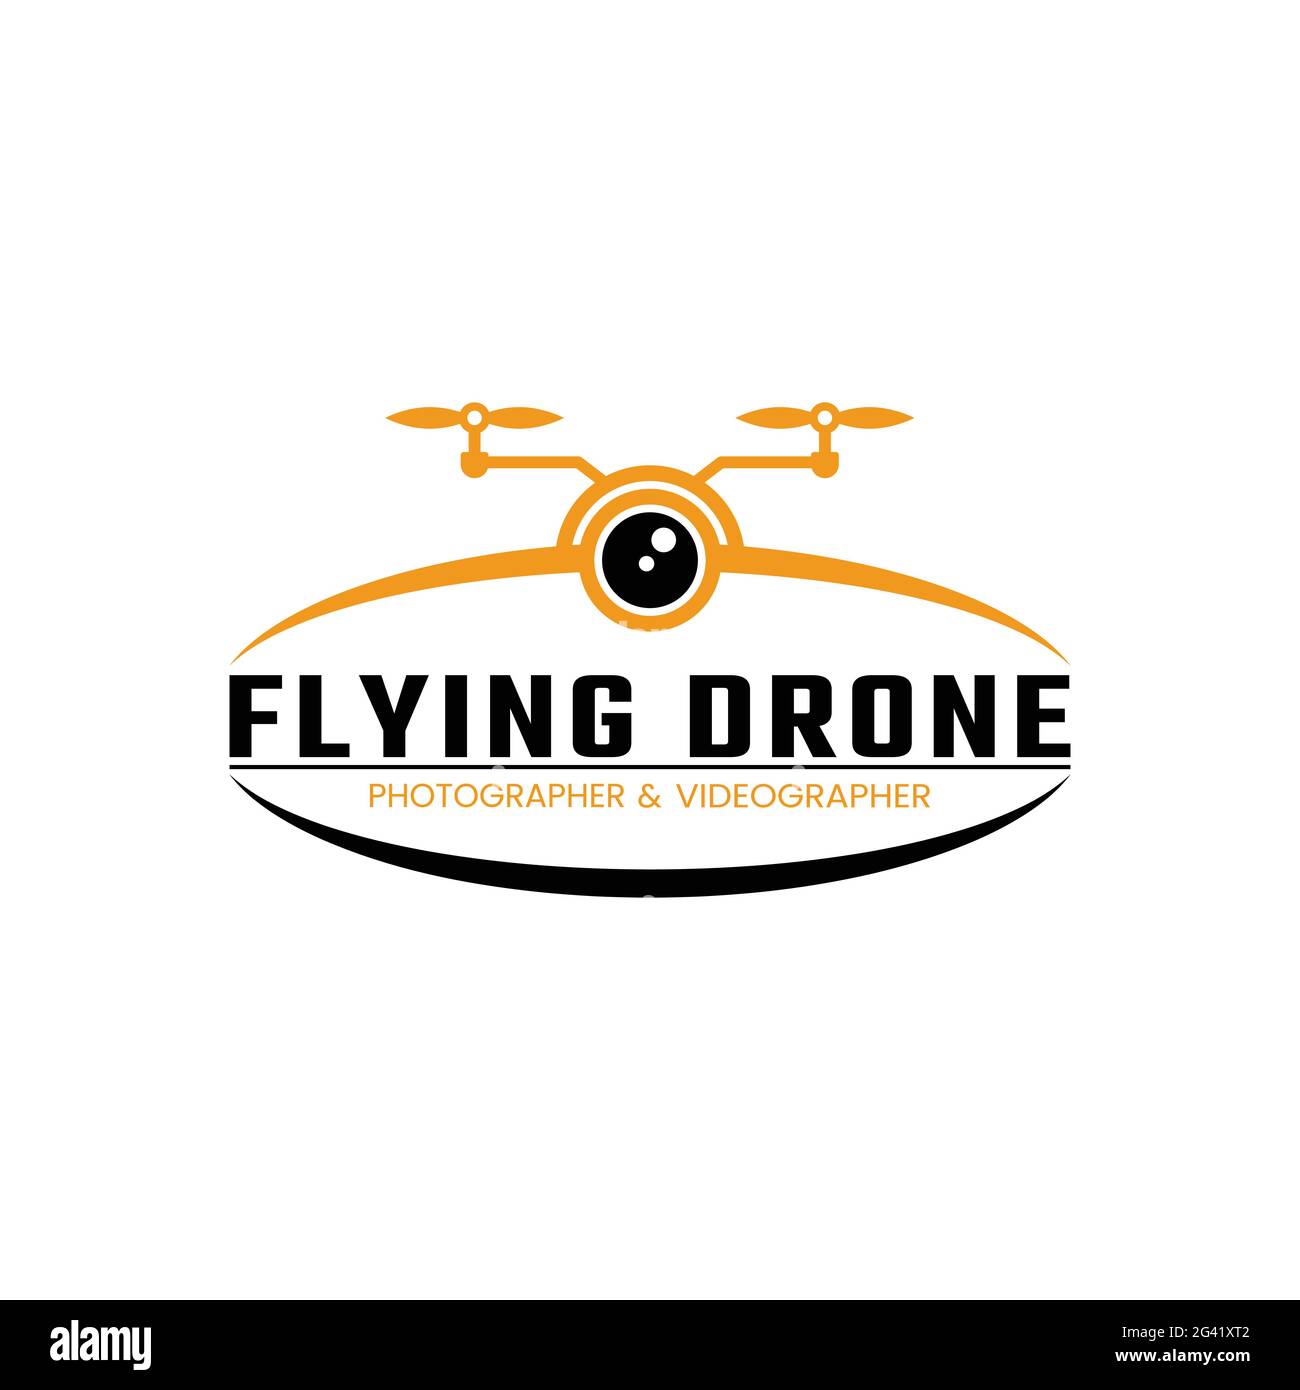 Flying Drone Logo Design Template. Suitable for Photography Videography Multimedia Broadcasting Delivery Company Business Corporate Brand Simple Stock Vector